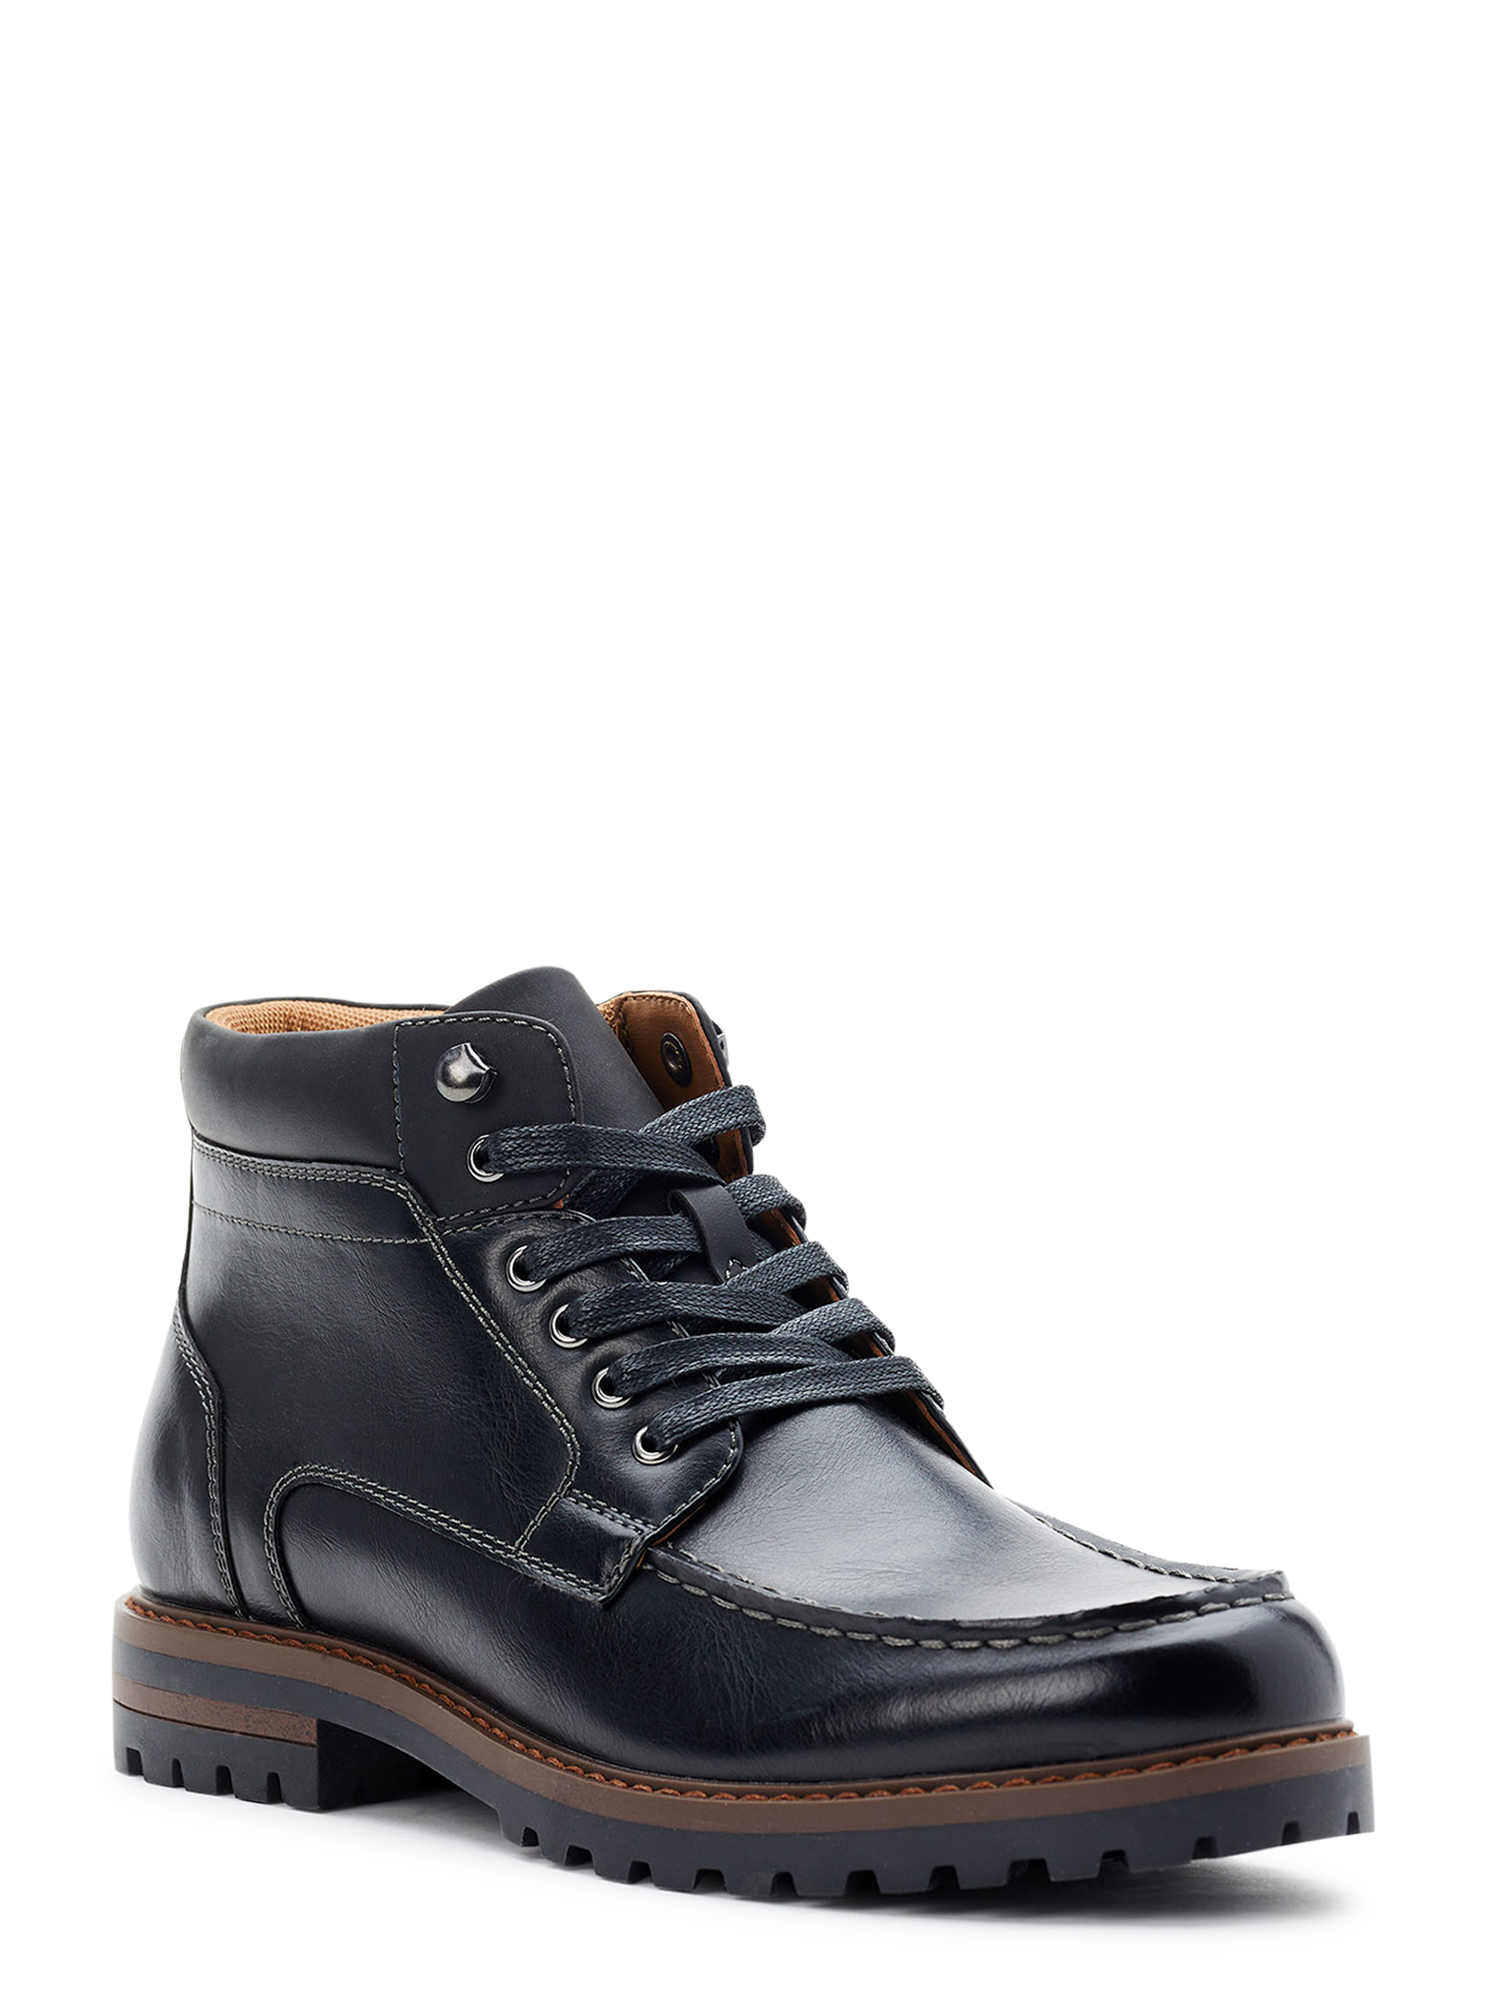 Madden NYC Men's Tristen Lug Sole Moc Toe Boots - image 1 of 5